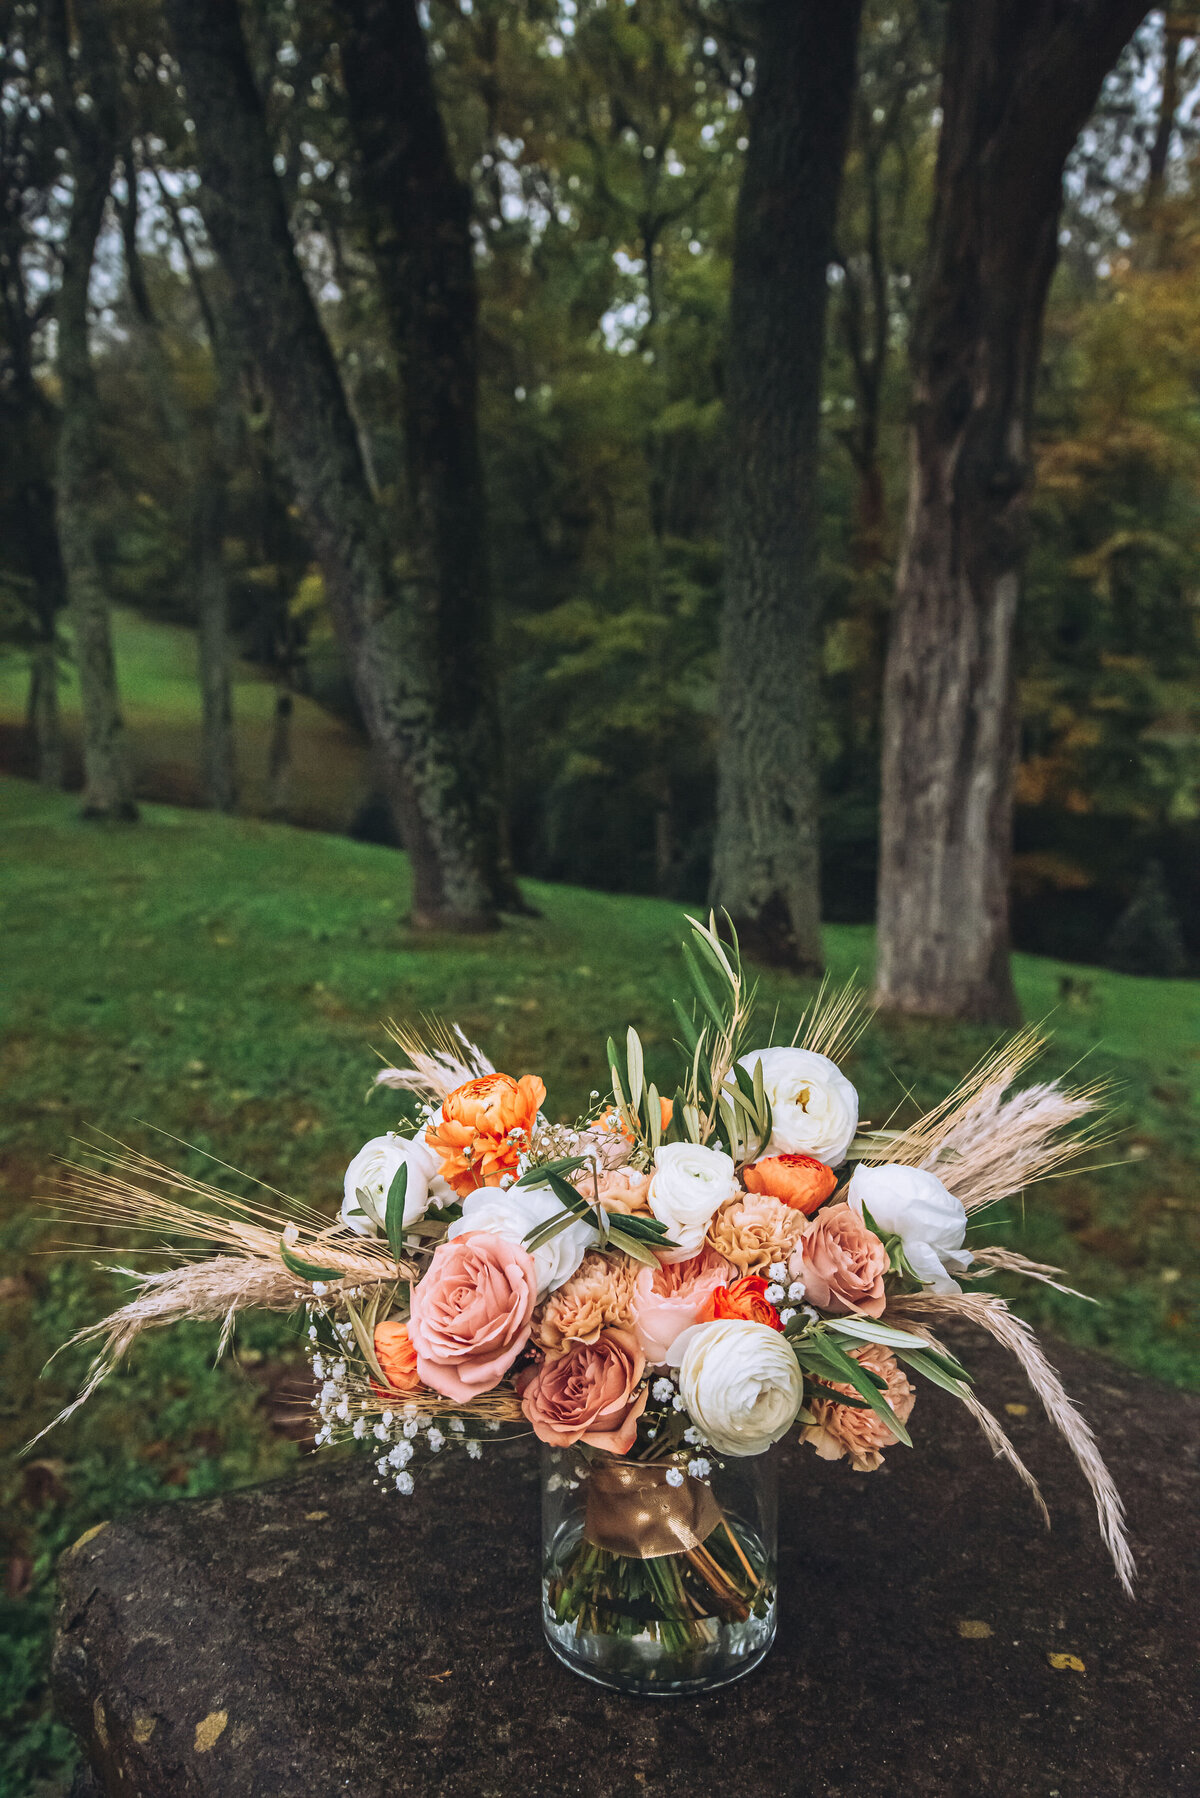 Bridal bouquet with peach, orange, white flowers accented with pampas and wheat